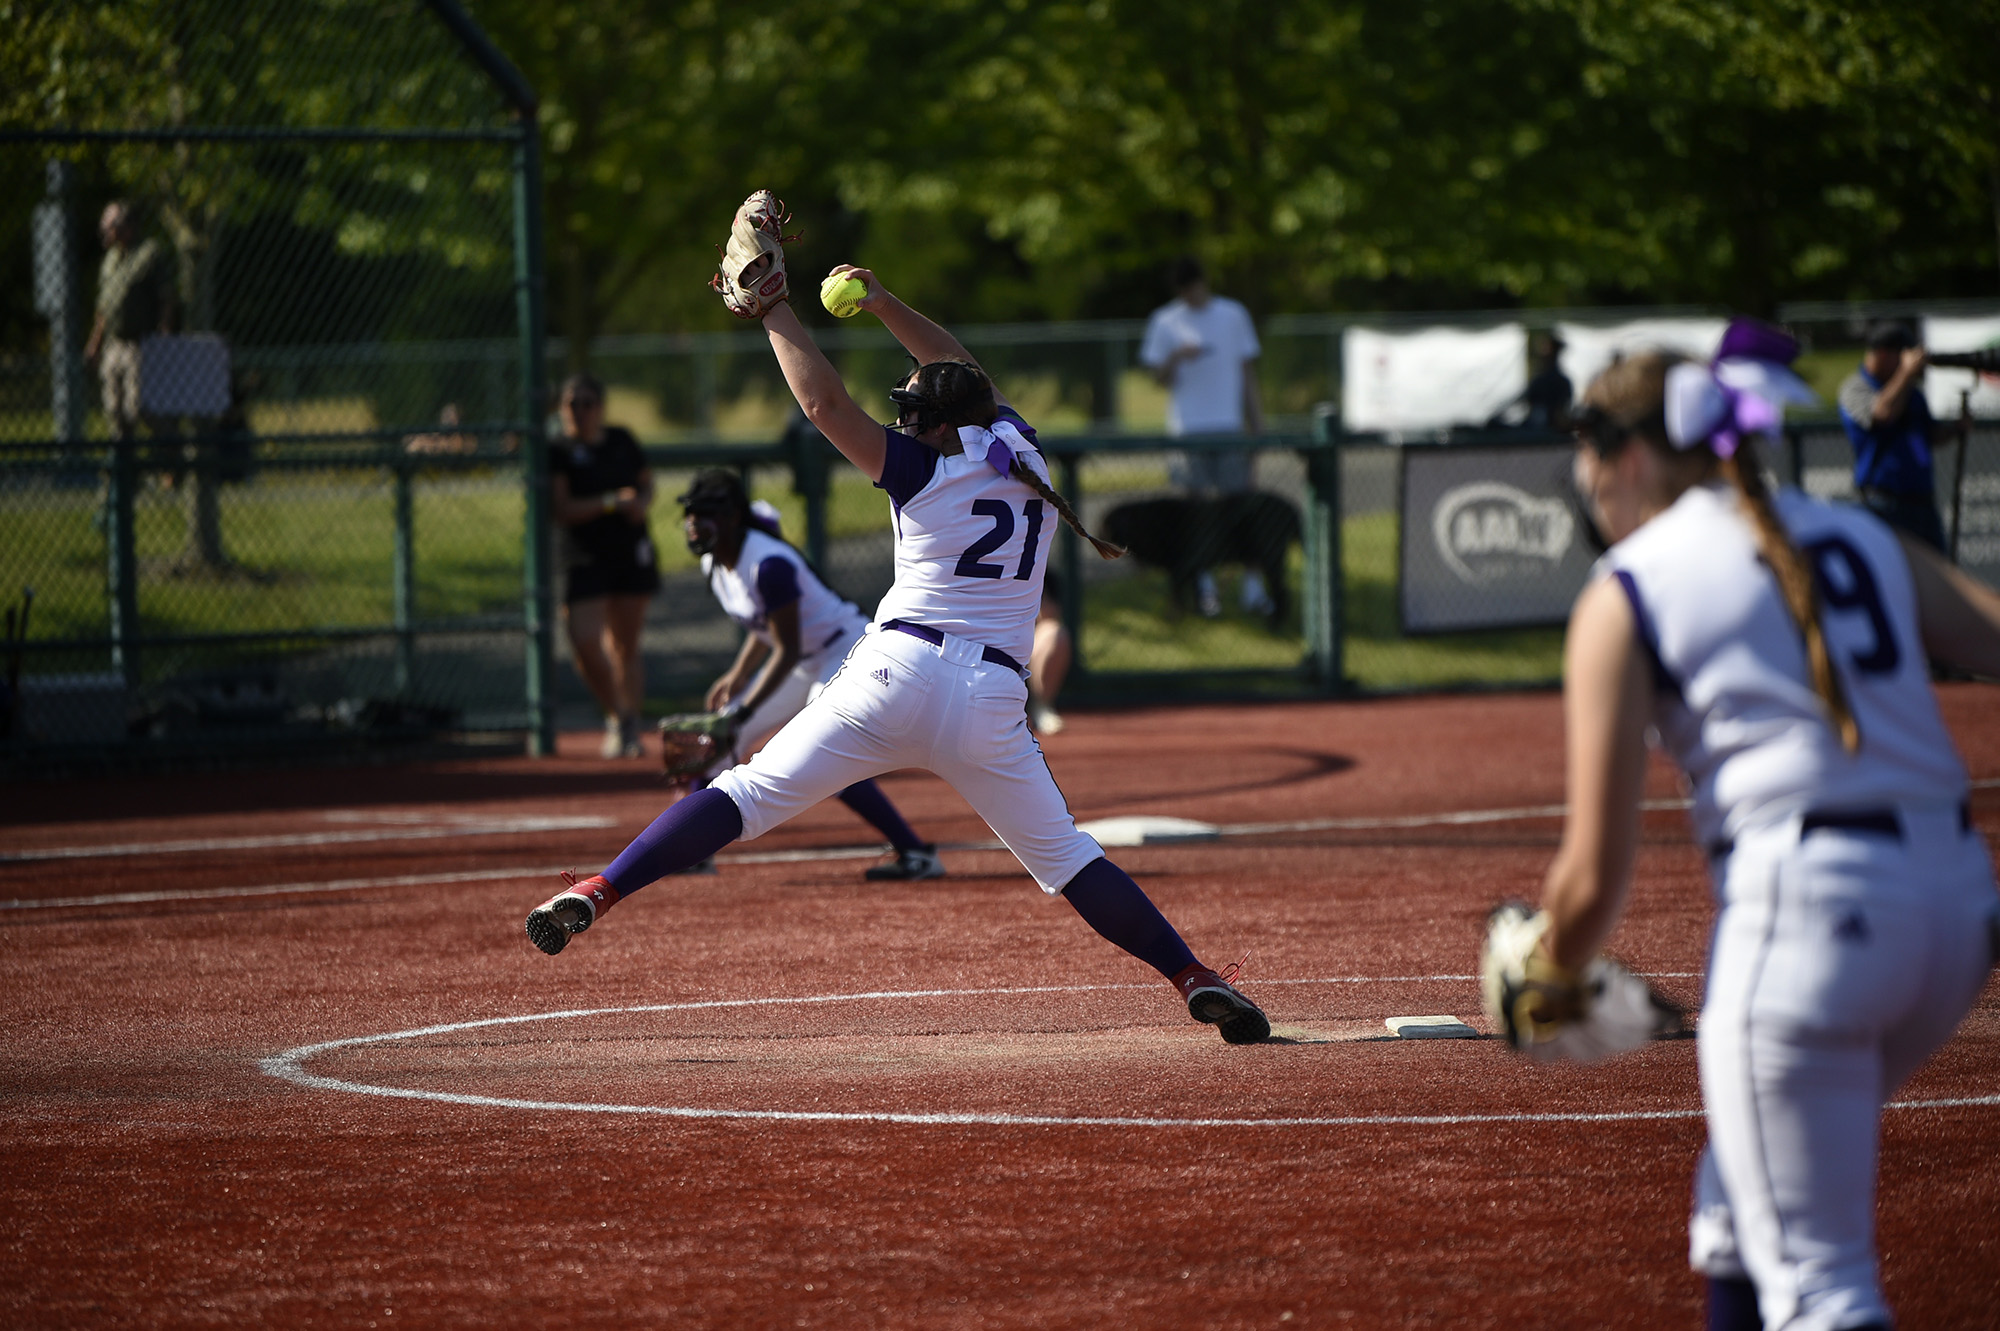 Heritage's Lillie Stroup (21) delivers a pitch during Heritage's 11-6 win over Garfield at the 3A softball state tournament at the Regional Athletic Complex in Lacey on Thursday, May 25, 2023.